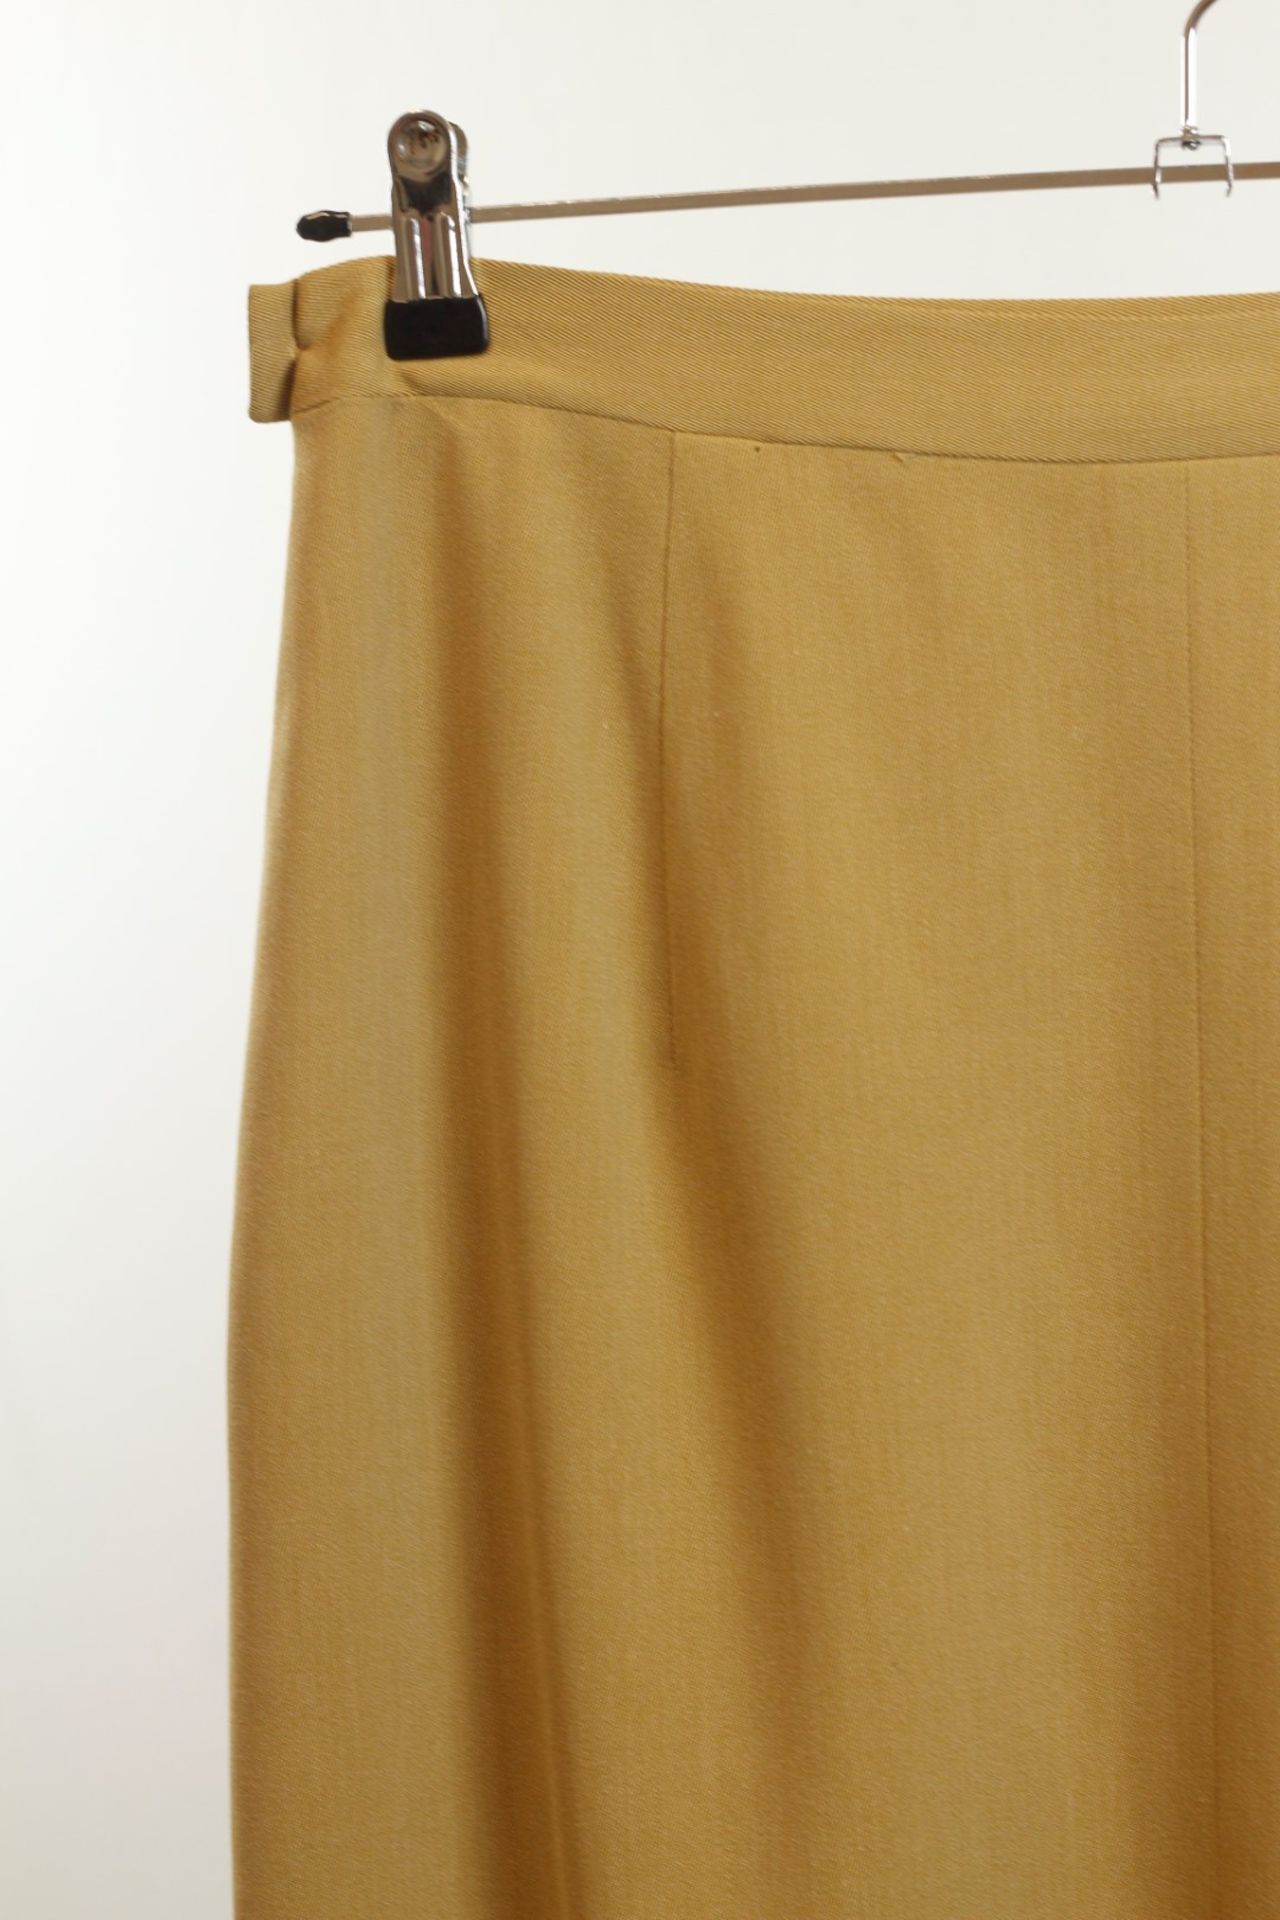 1 x Belvest Mustard Skirt - Size: 18 - Material: 75% Wool 25% Cotton. Lining 100% Rayon - From a - Image 6 of 7